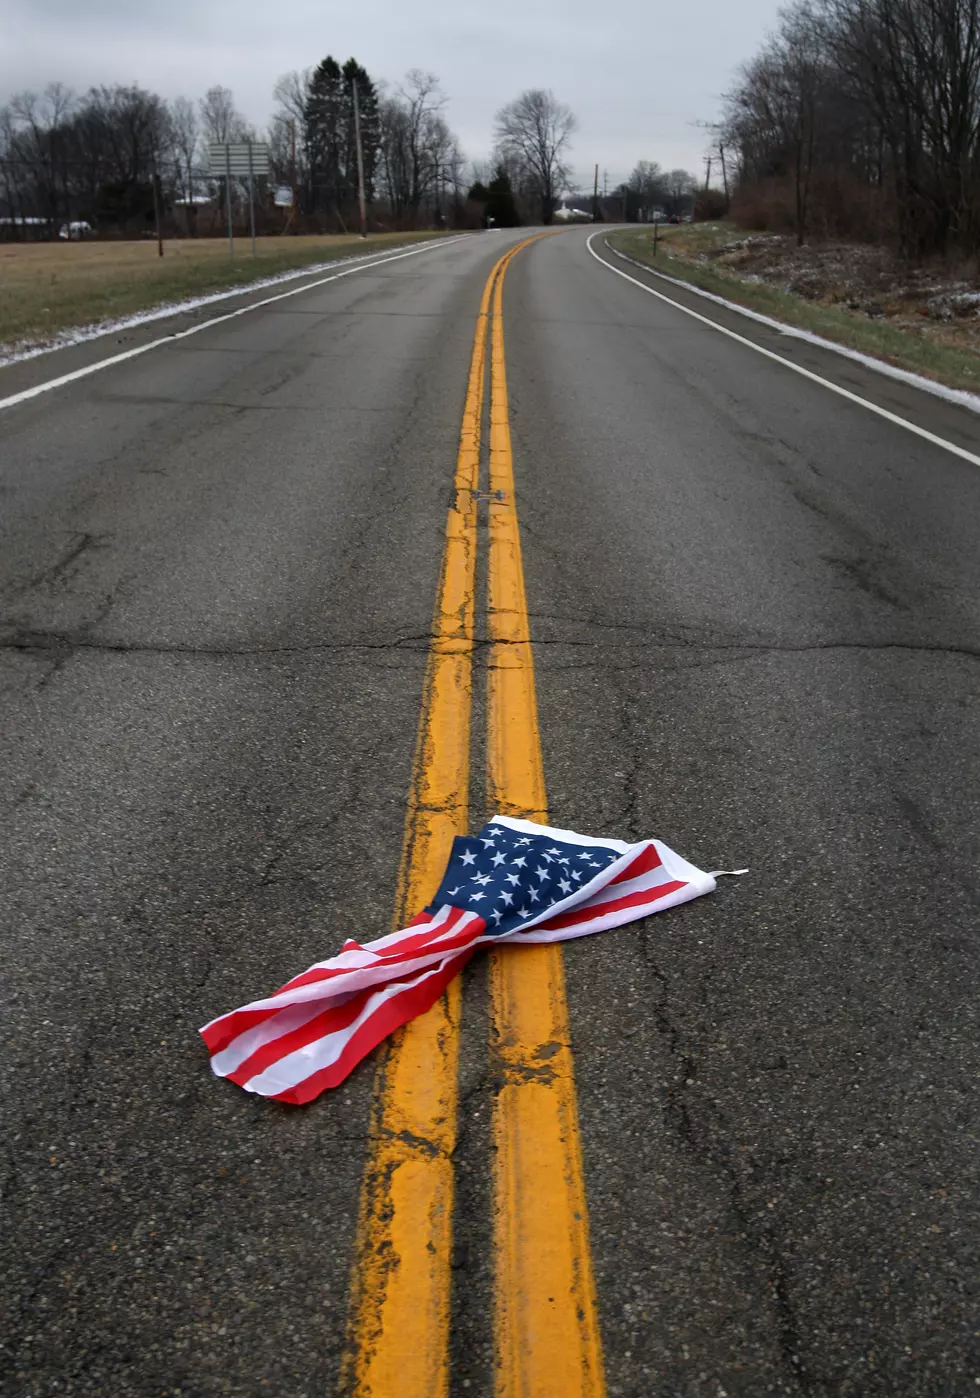 Is This Your Flag I Found On The Road @ 40th & Lincoln?